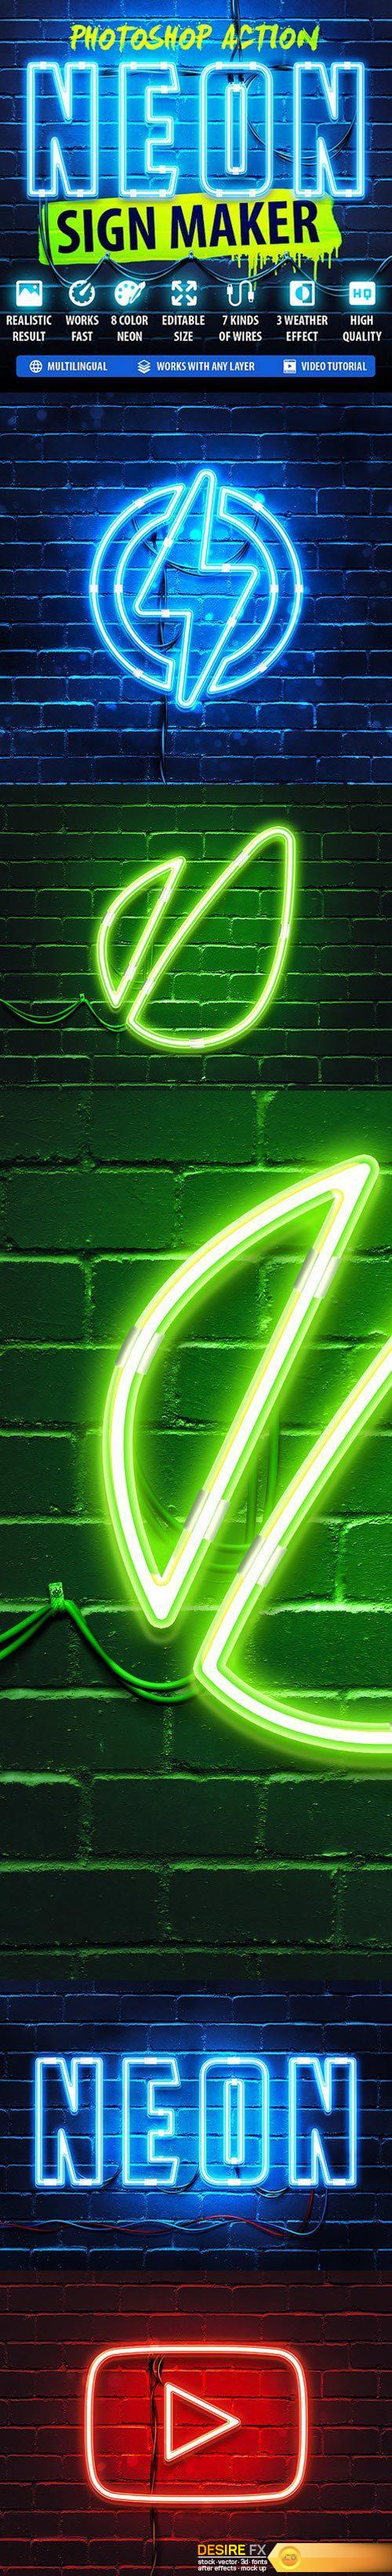 Graphicriver - Neon Sign Maker Photoshop Action 19387470